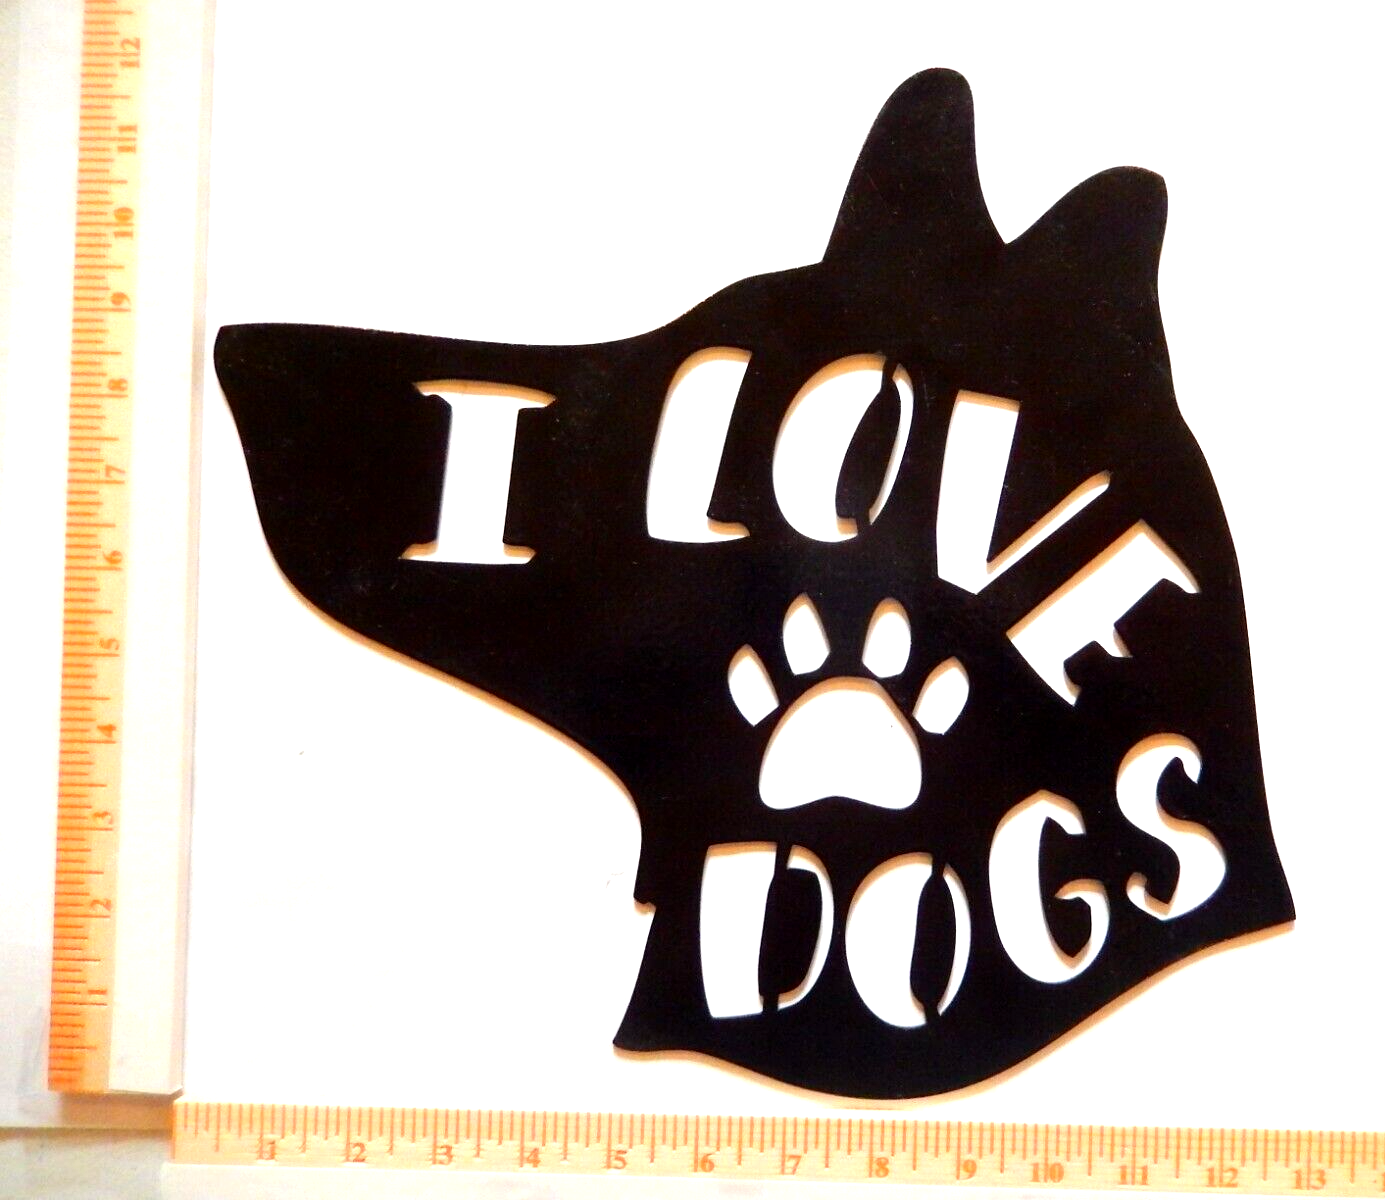 "I LOVE DOGS" 14 gauge thick Powder Coated Black Metal Wall ~ Art 12"x12